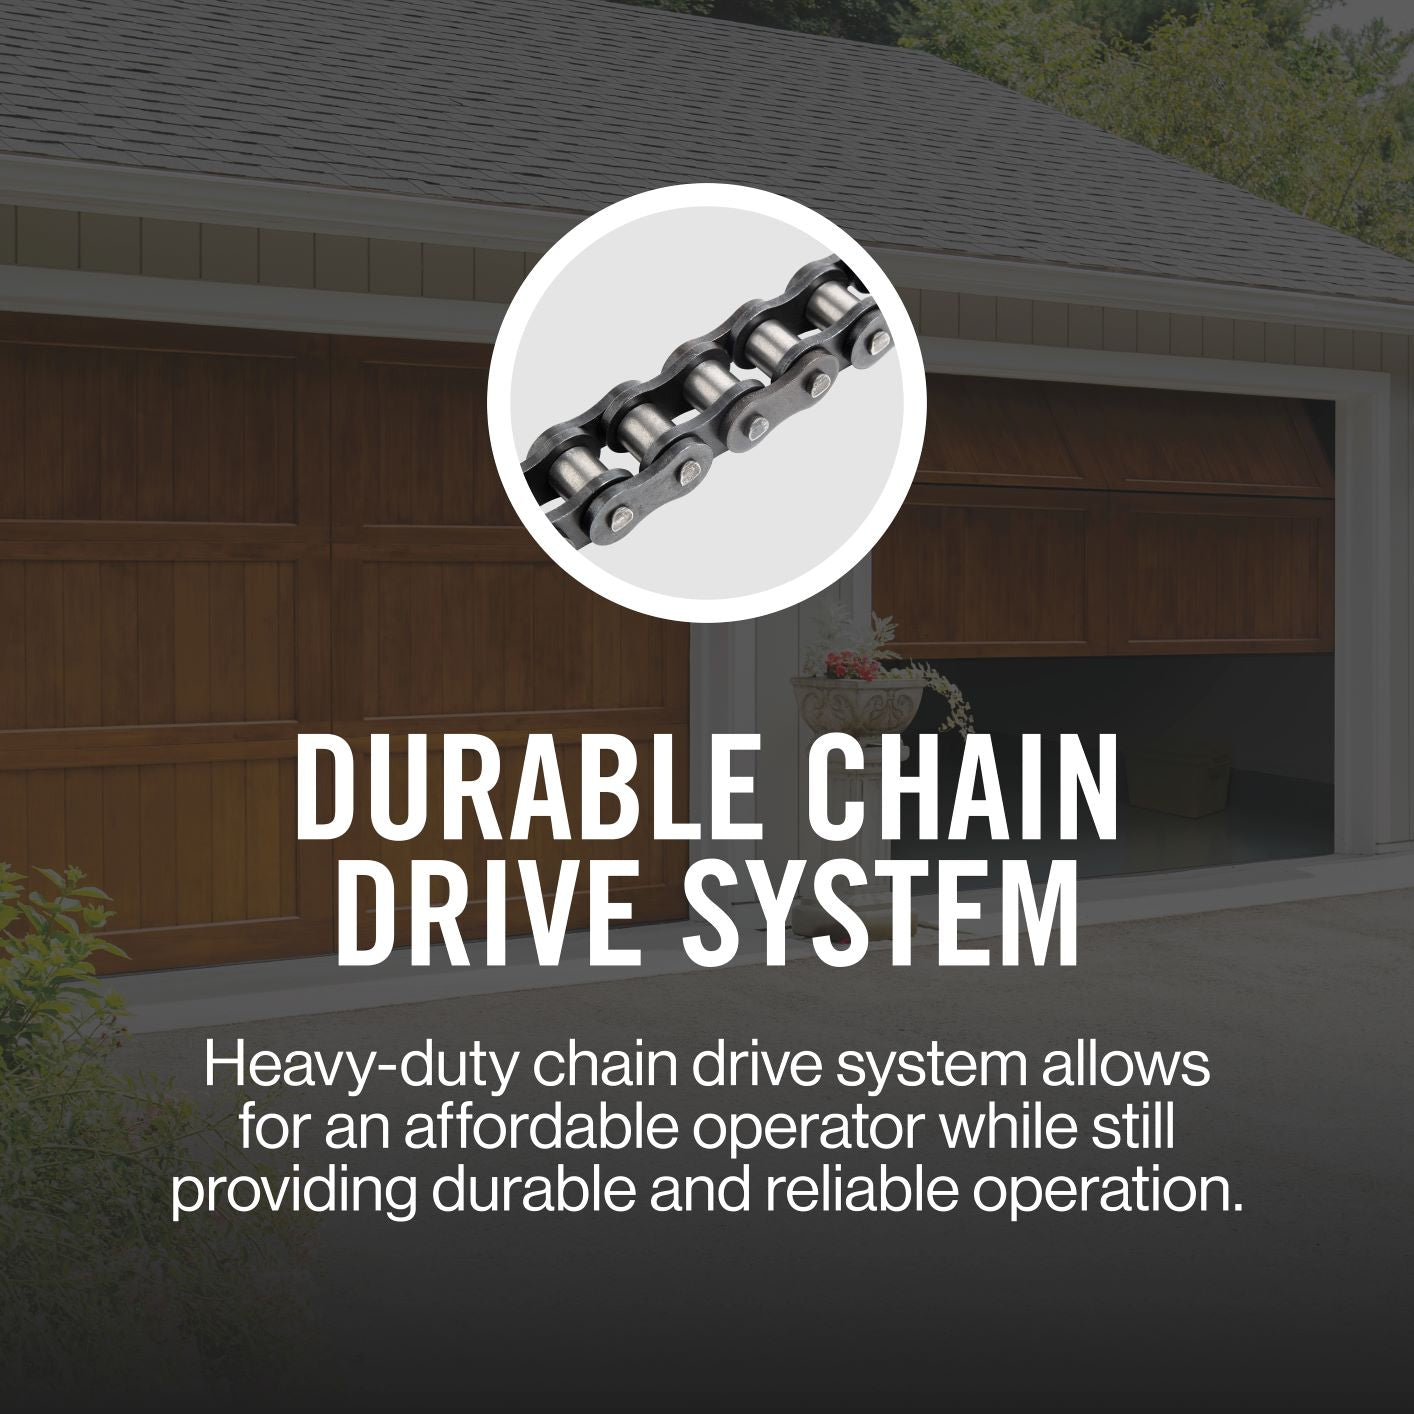 Durable chain drive garage door opener systems by Genie_Heavy duty chain for durable and reliable operation